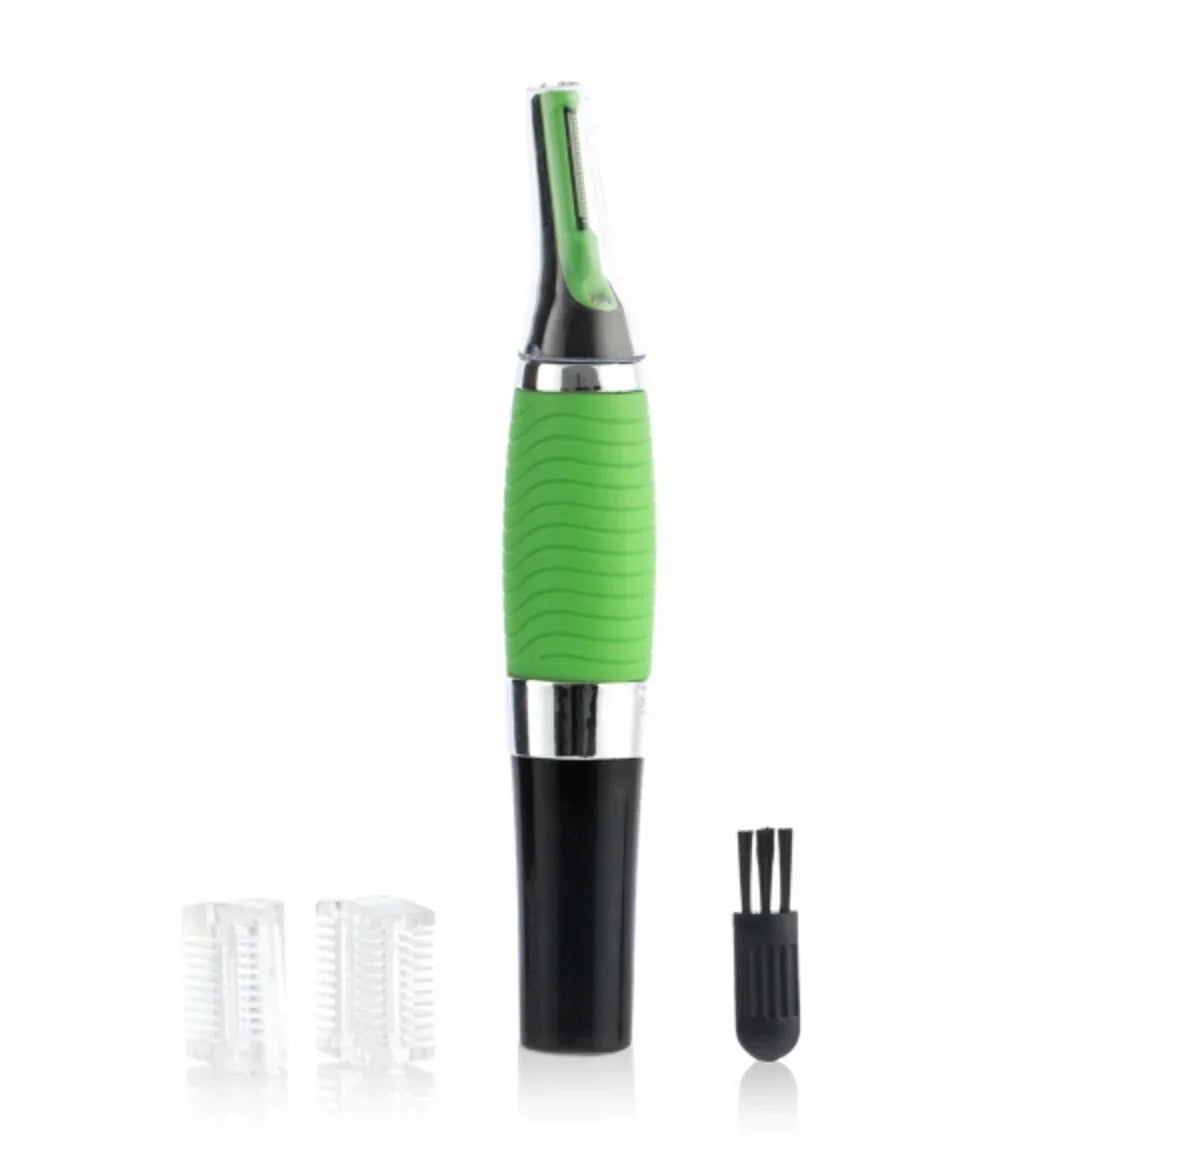 Electric precision hair trimmer with LED